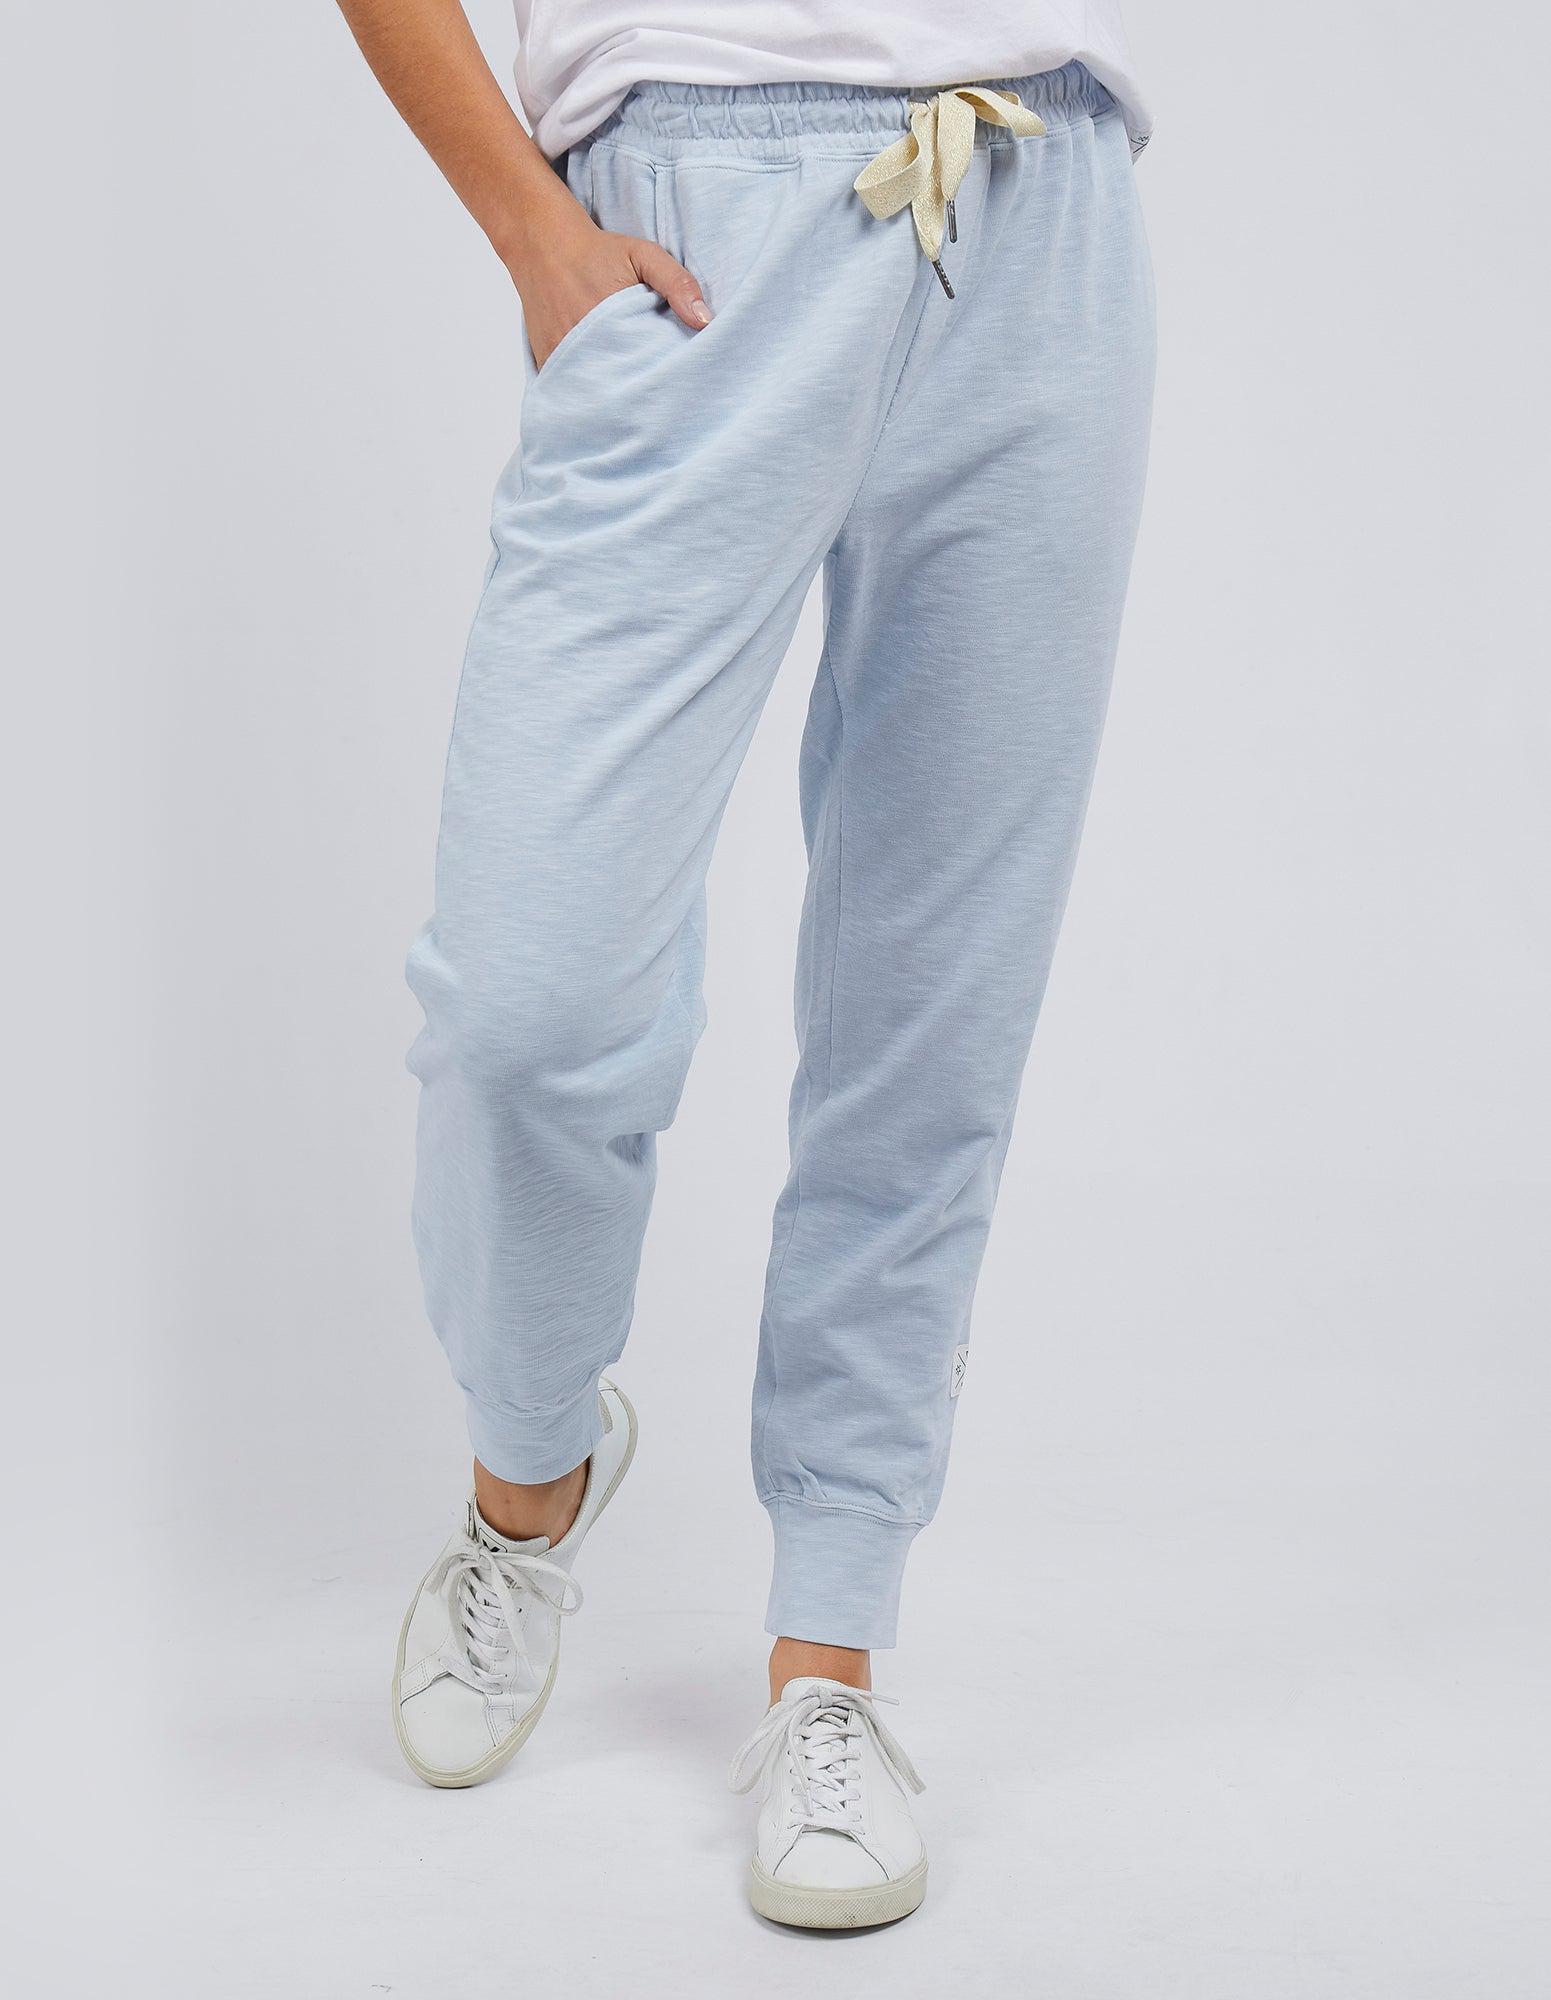 Out & About Pant - Light Blue - Elm Lifestyle - FUDGE Gifts Home Lifestyle